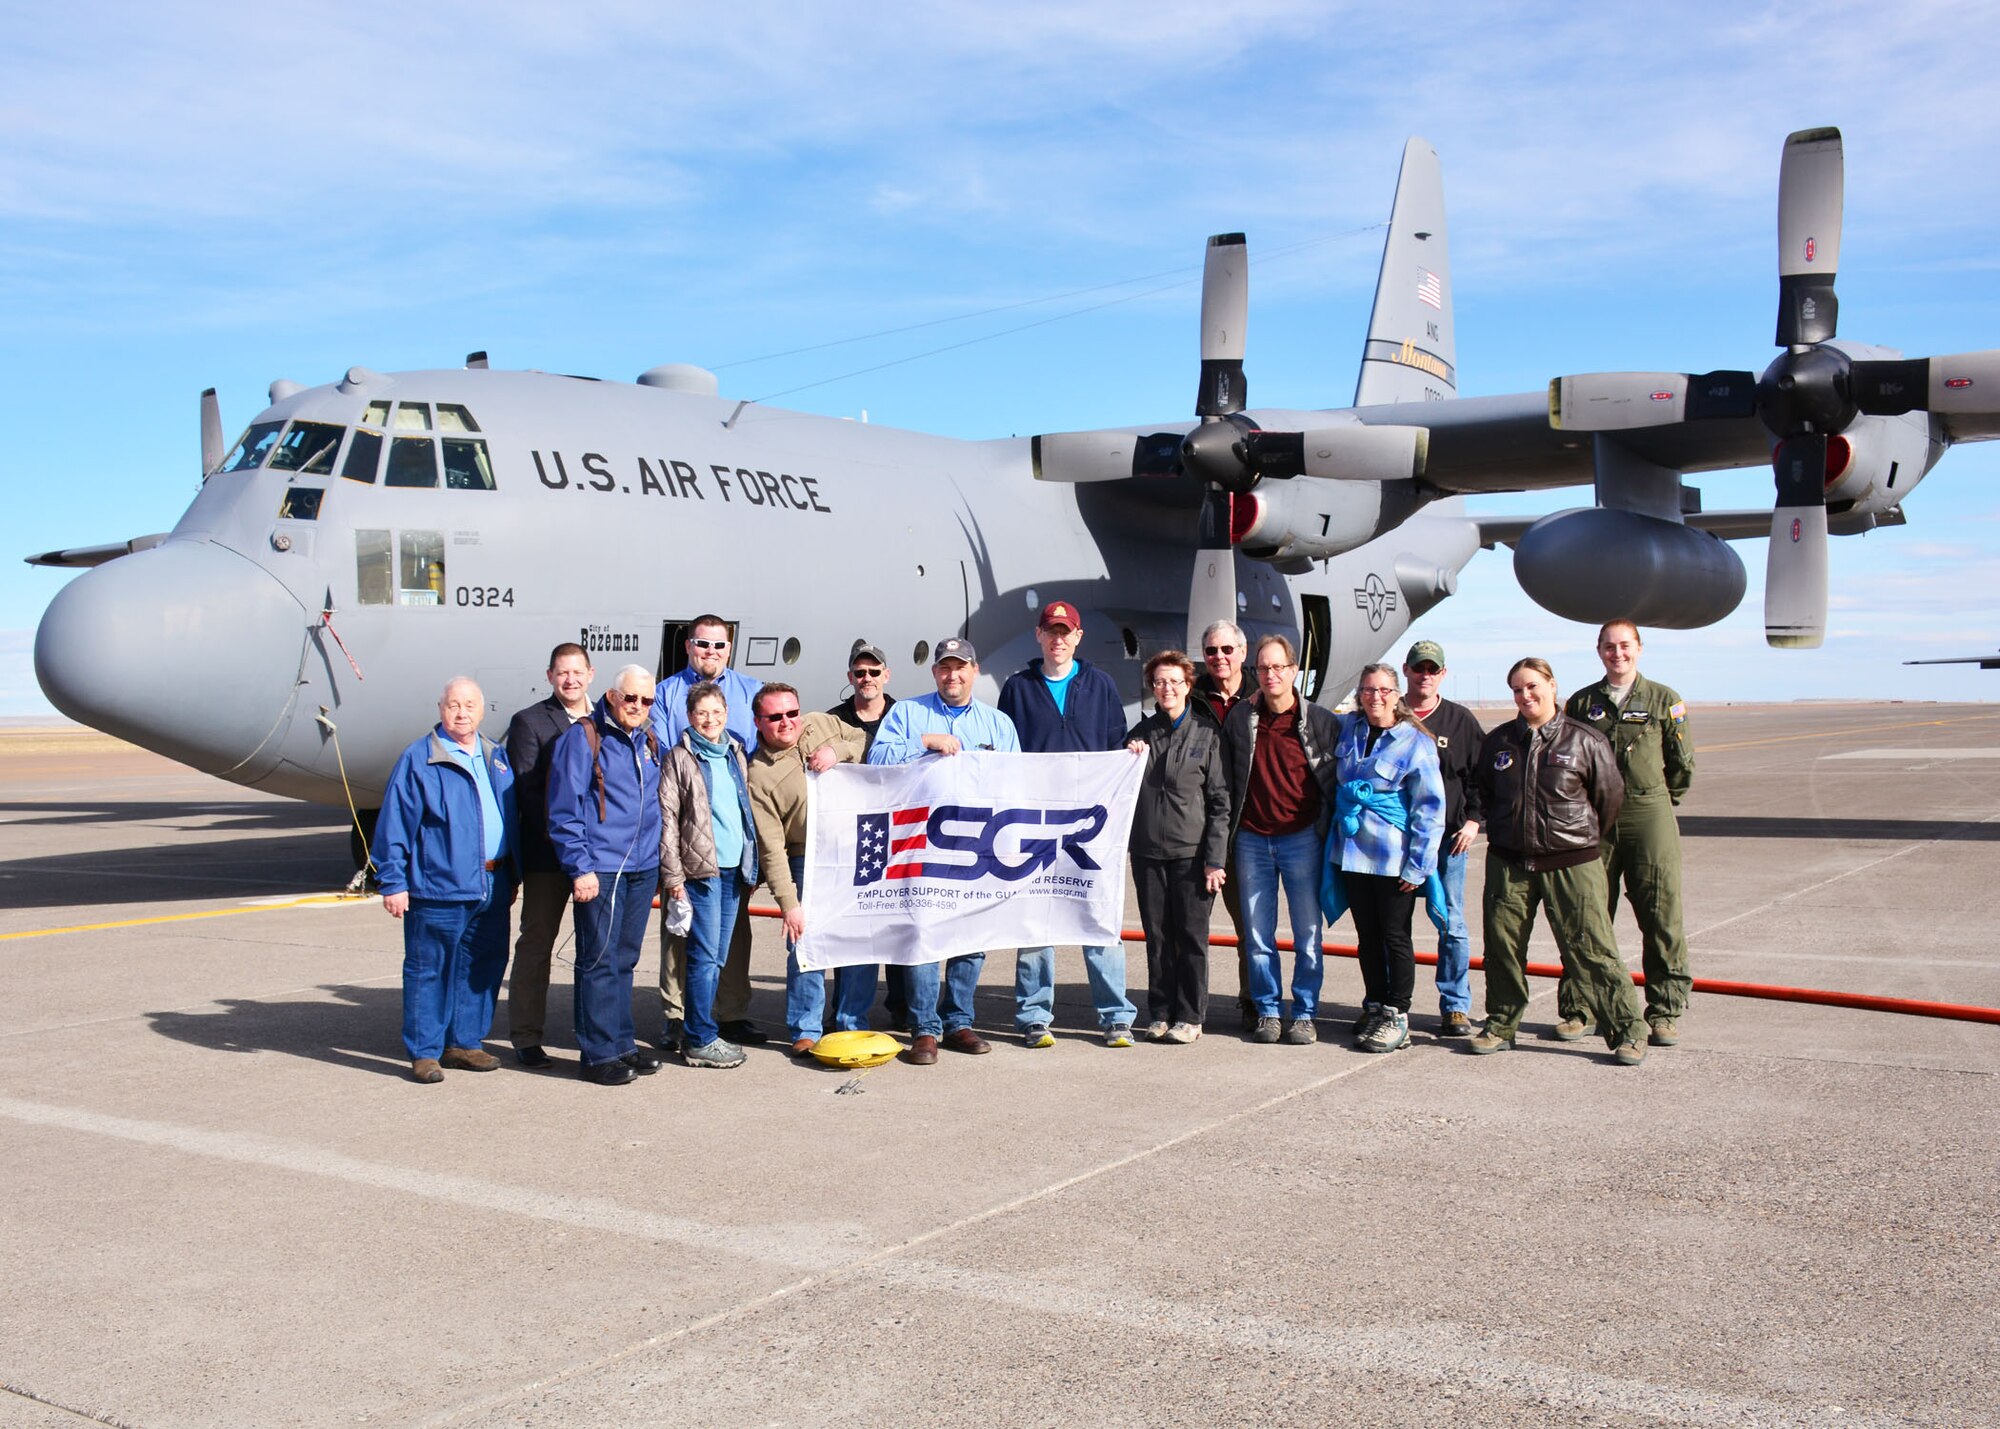 Employers and community leaders pose in front of a 120th Airlift Wing C-130 Hercules transport aircraft during the Employer Support of the Guard and Reserve (ESGR) “Breakfast with the Boss” event held on base in Great Falls, Mont. March 5, 2016.   (U.S. Air National Guard photo by Senior Master Sgt. Eric Peterson)